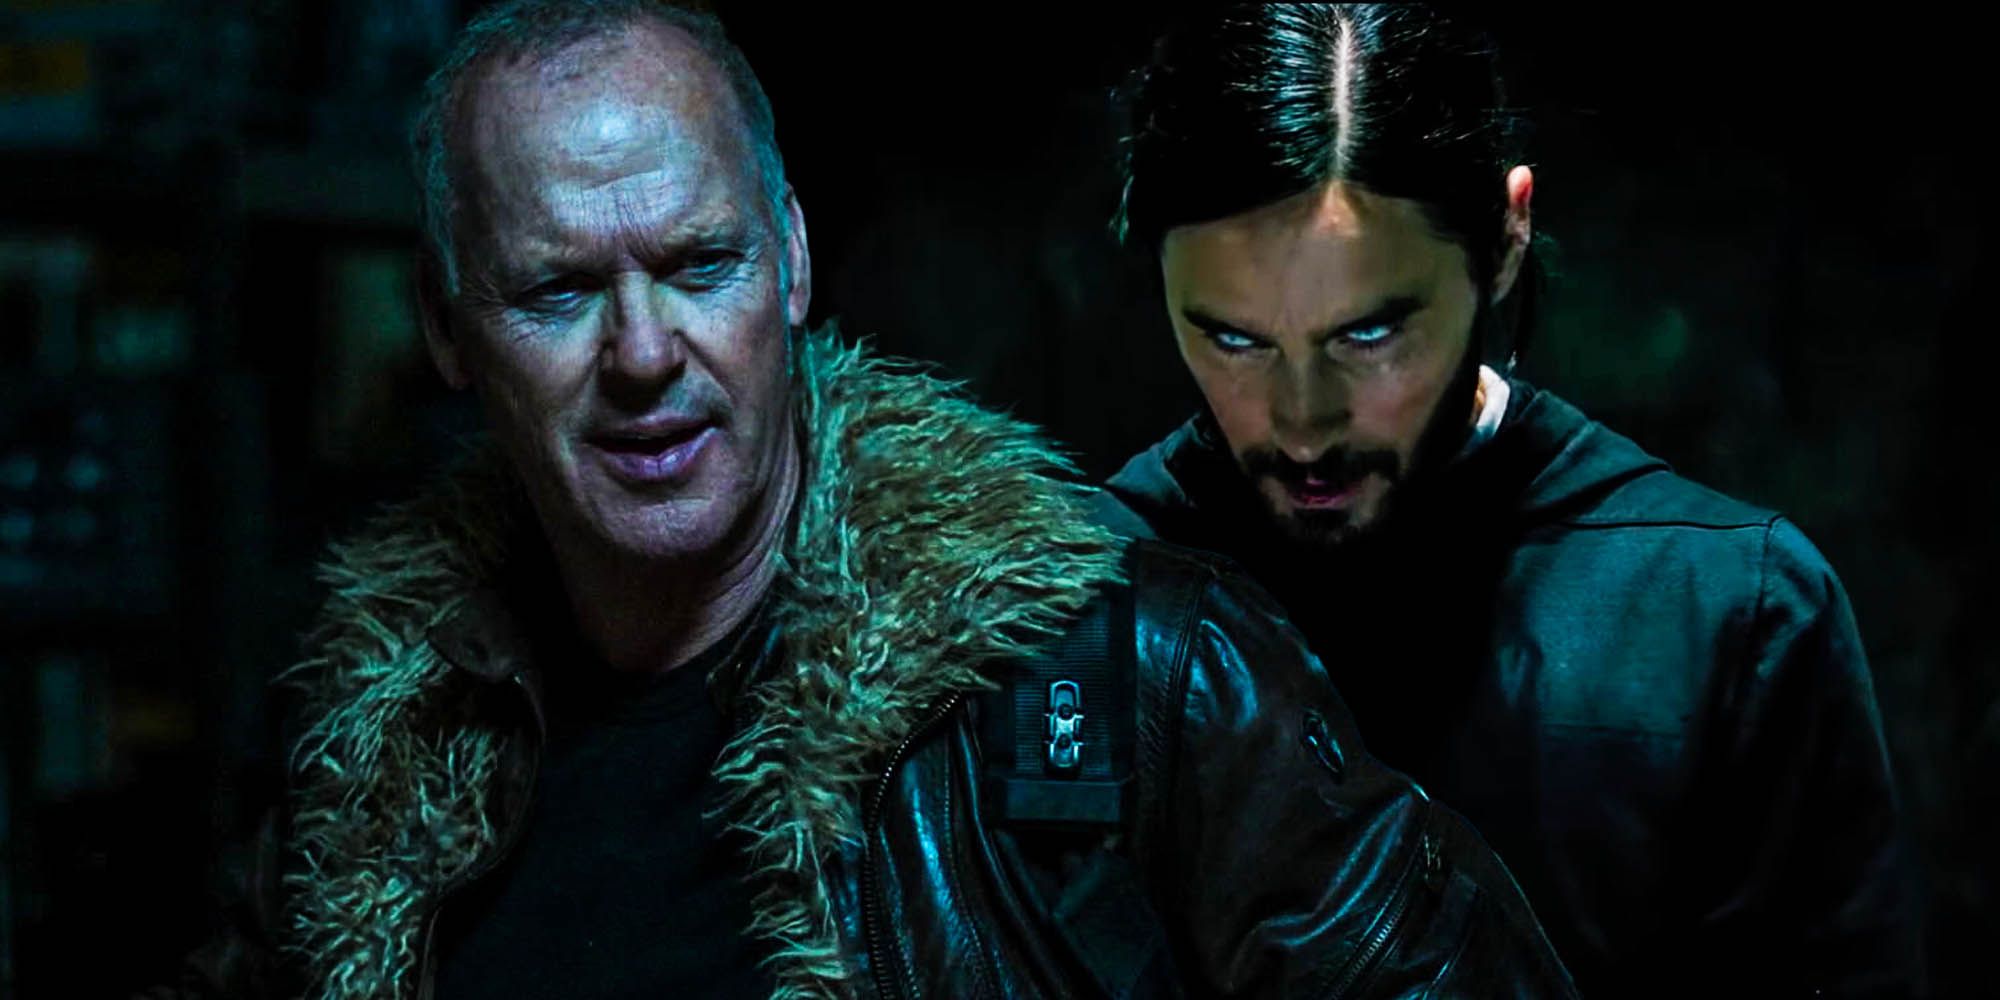 Michael keaton's Vulture in Spiderman: homecoming and jared leto's Morbius